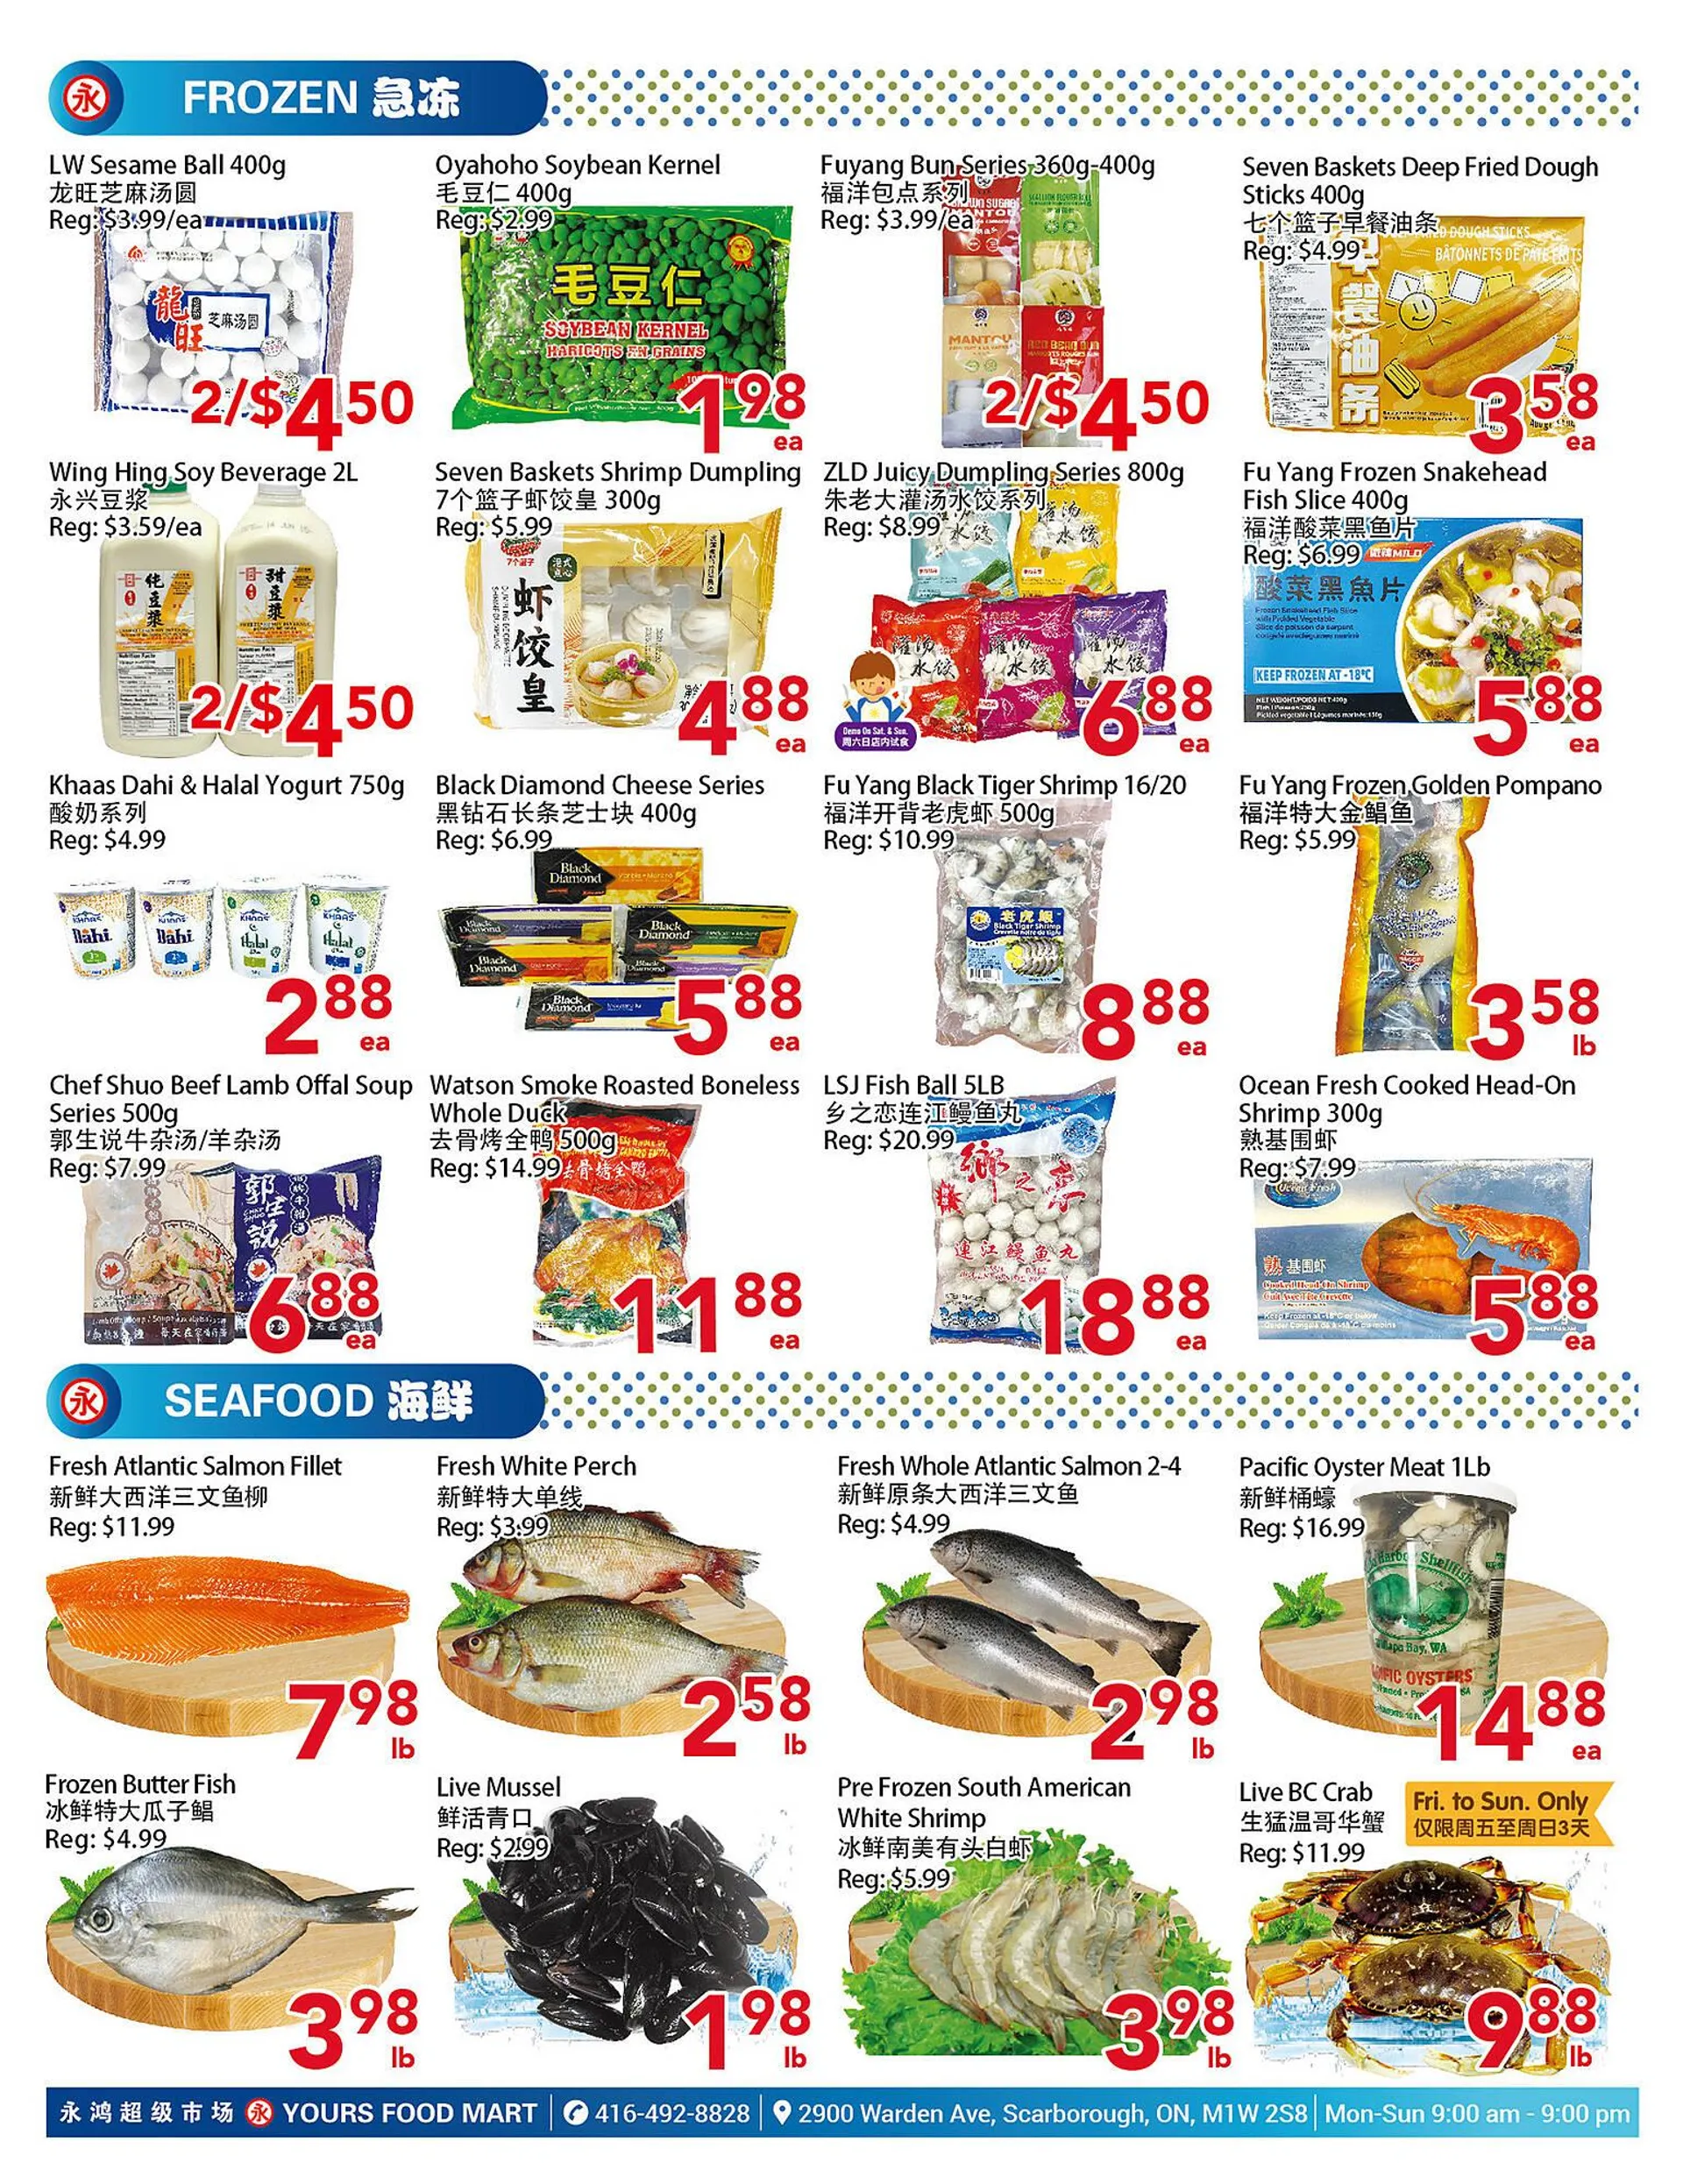 Yours Food Mart flyer - 4